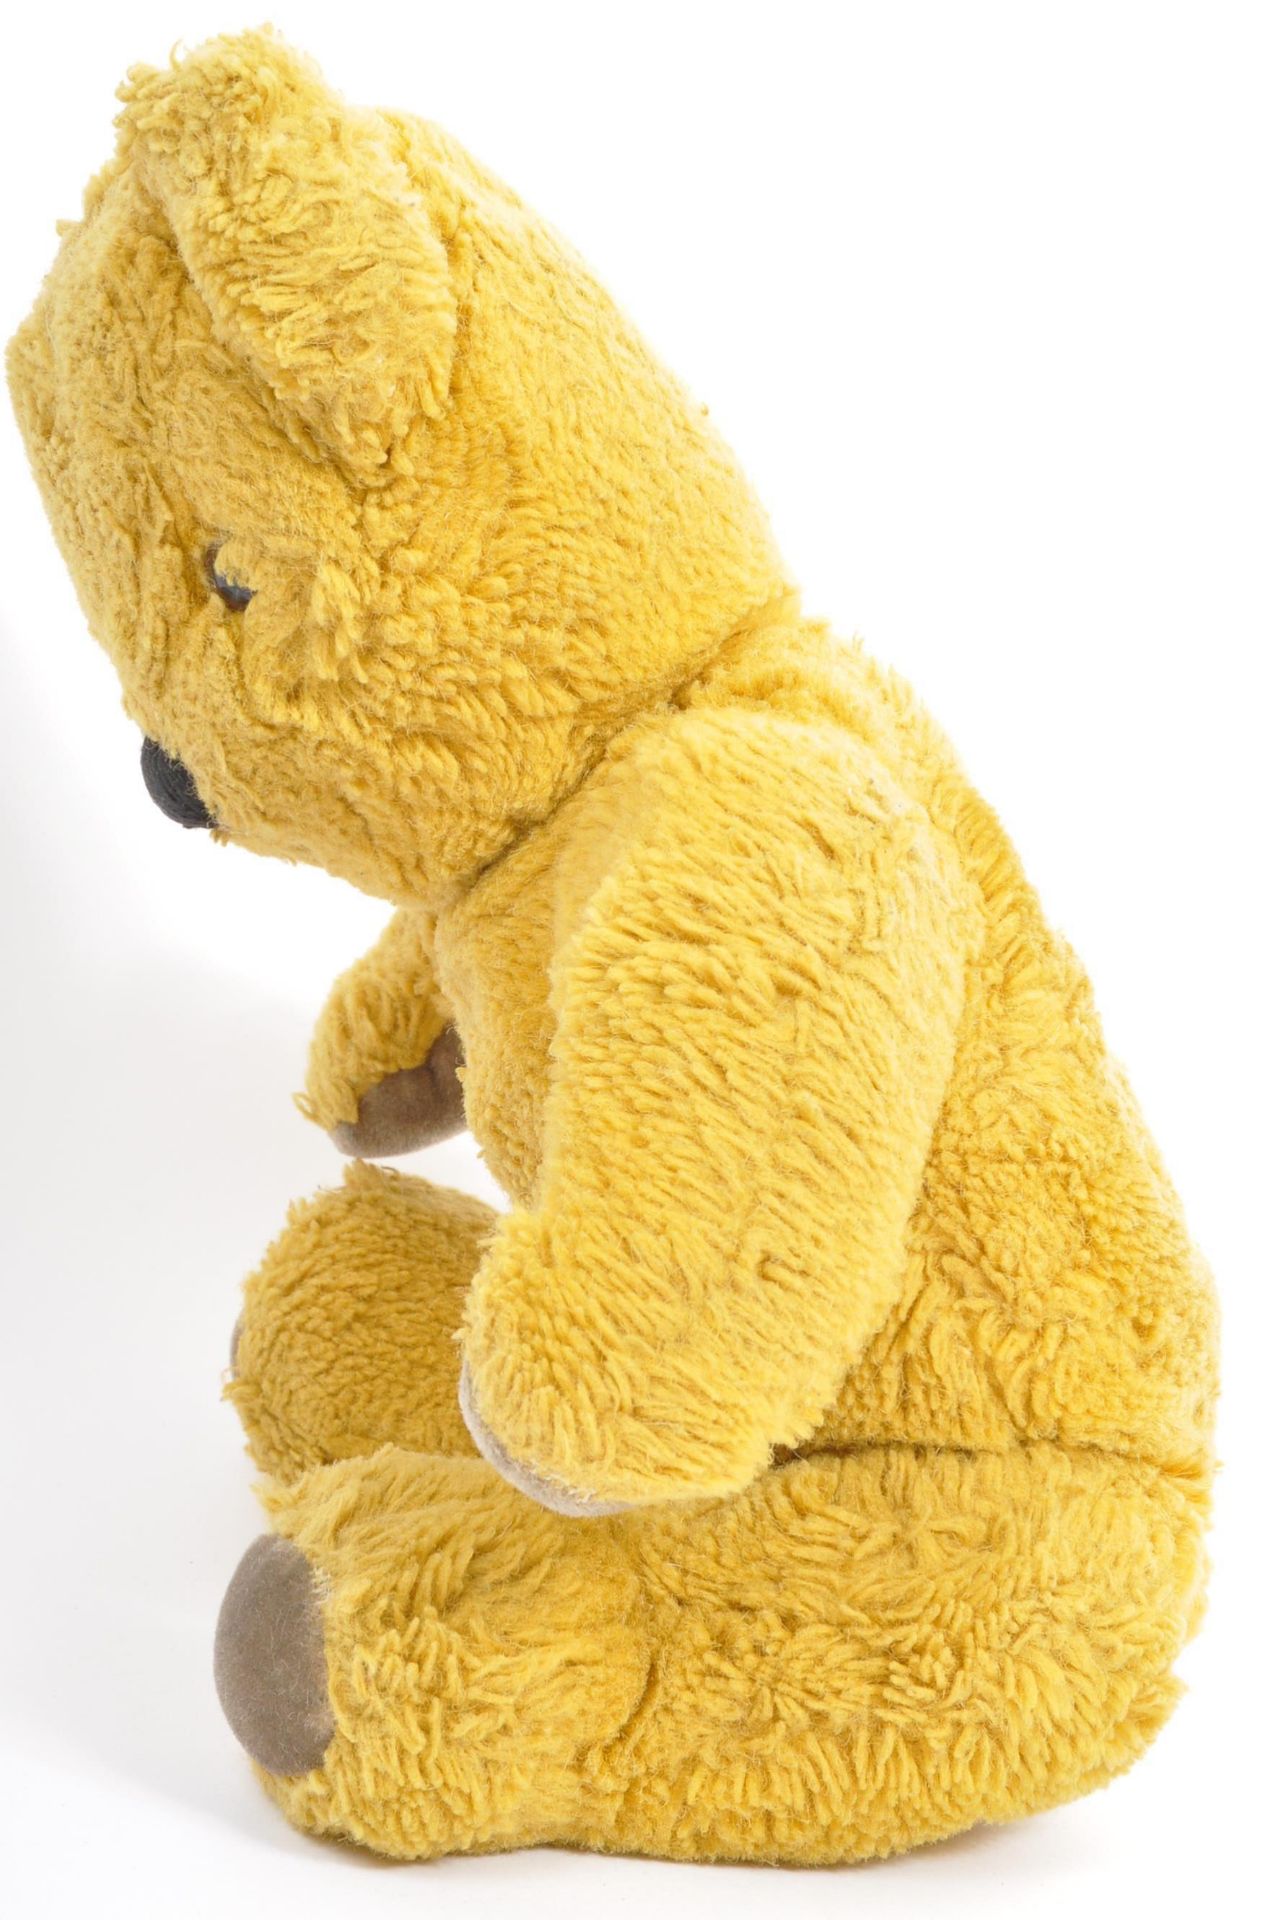 VINTAGE MERRYTHOUGHT SOFT TOY TEDDY BEAR - Image 2 of 6